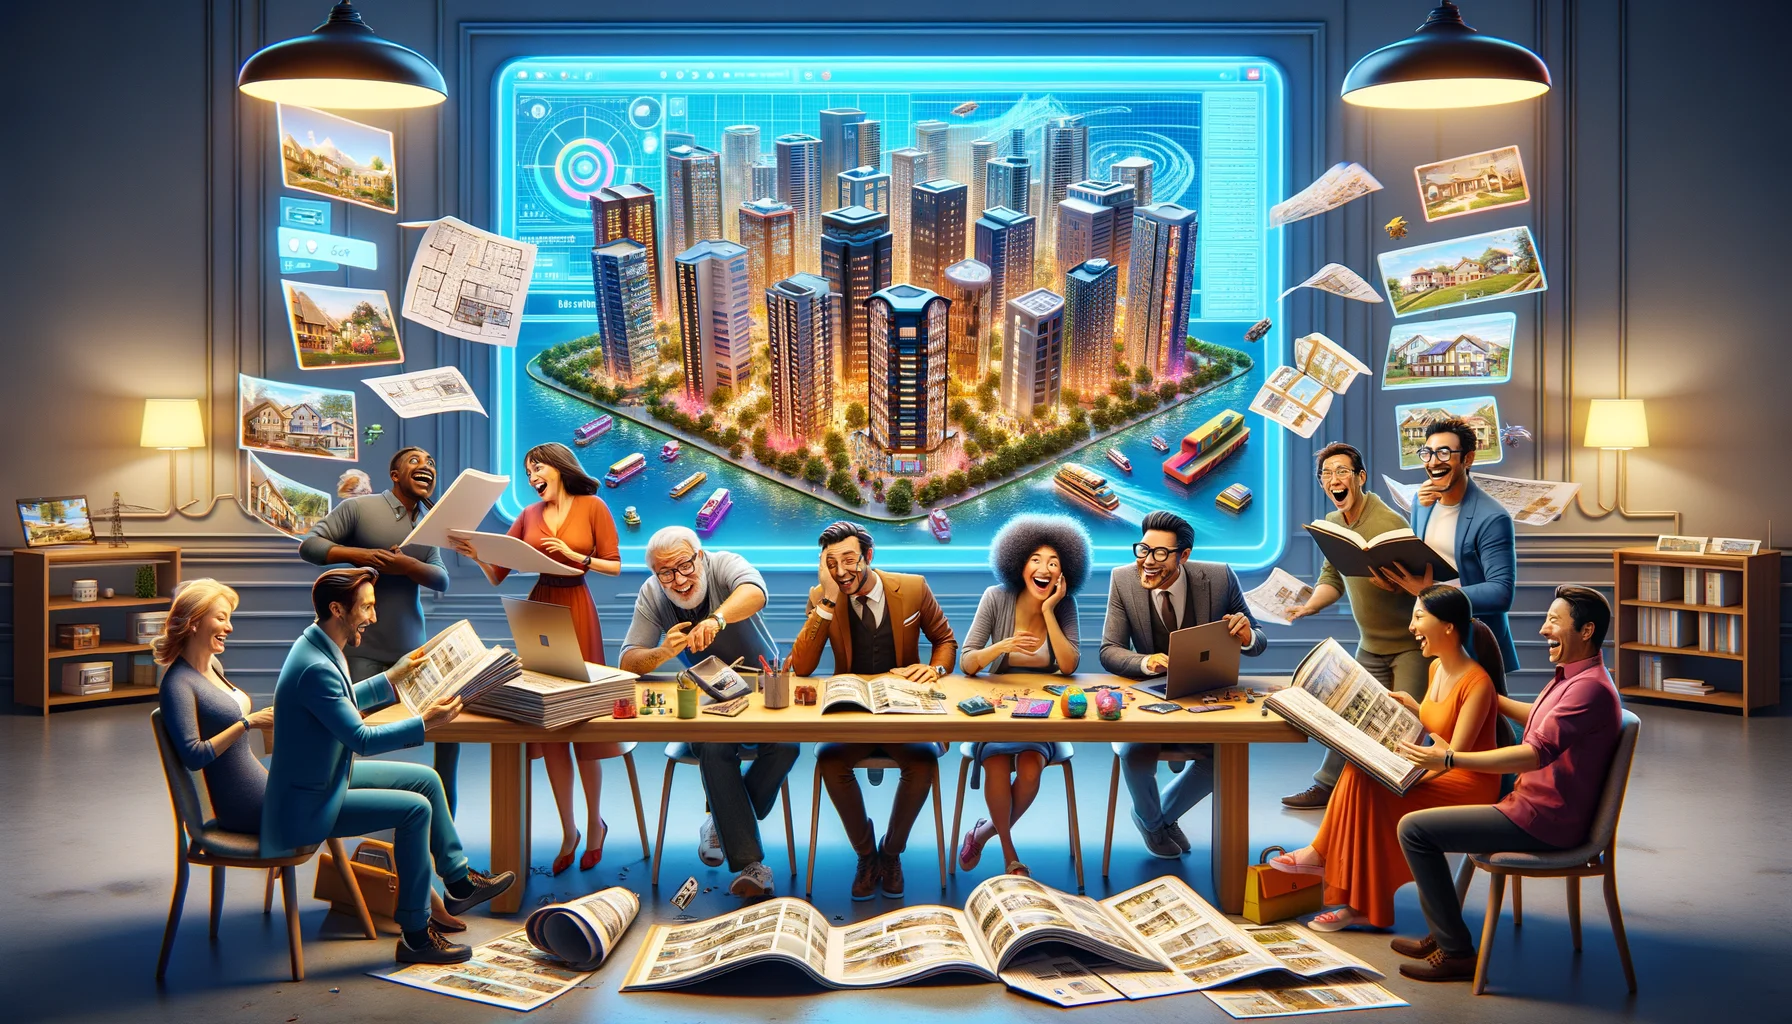 Imagine a lively scene representing a Comprehensive Real Estate Information Hub in a humorous and light-hearted way. Imagine a variety of potential buyers: an excited Caucasian couple looking at a digital screen showcasing various properties, a curious black woman analyzing a blueprint spread on a long table, a South Asian man wearing reading glasses and flipping through a huge book of property listings, and a Middle-Eastern family discussing options in front of a 3D interactive map of the city. The atmosphere is filled with thrills and chuckles over the interesting aspects of properties, making the place feel like a happening carnival.